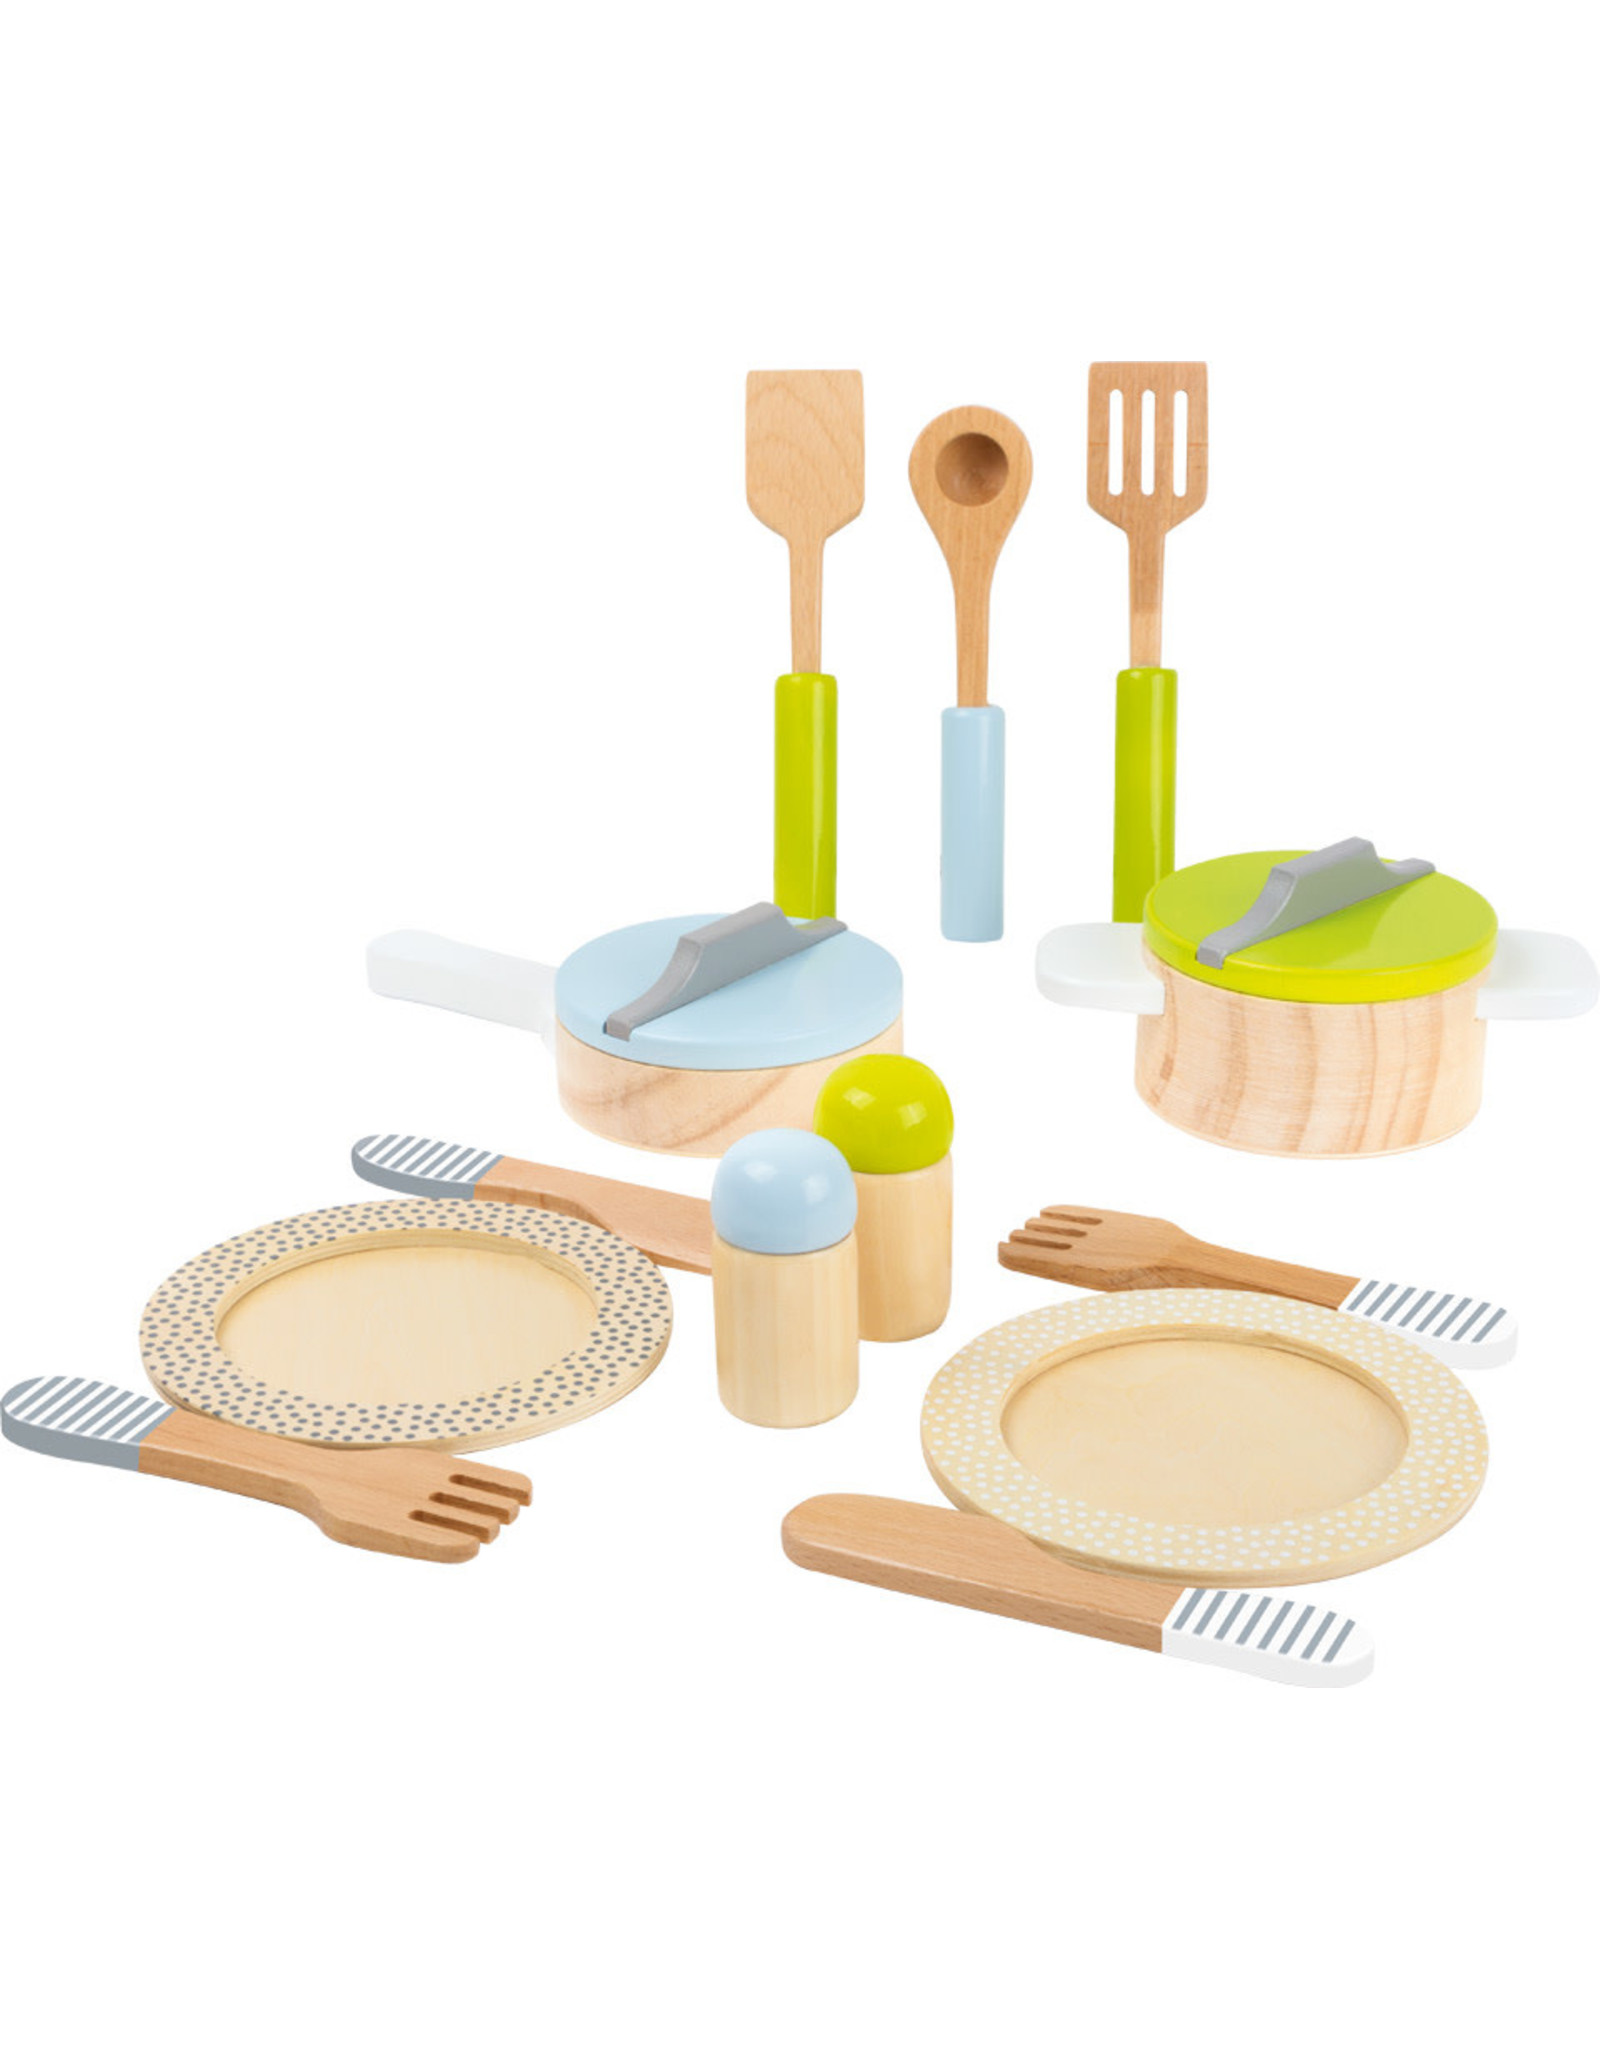 Crockery and Cookware Playset